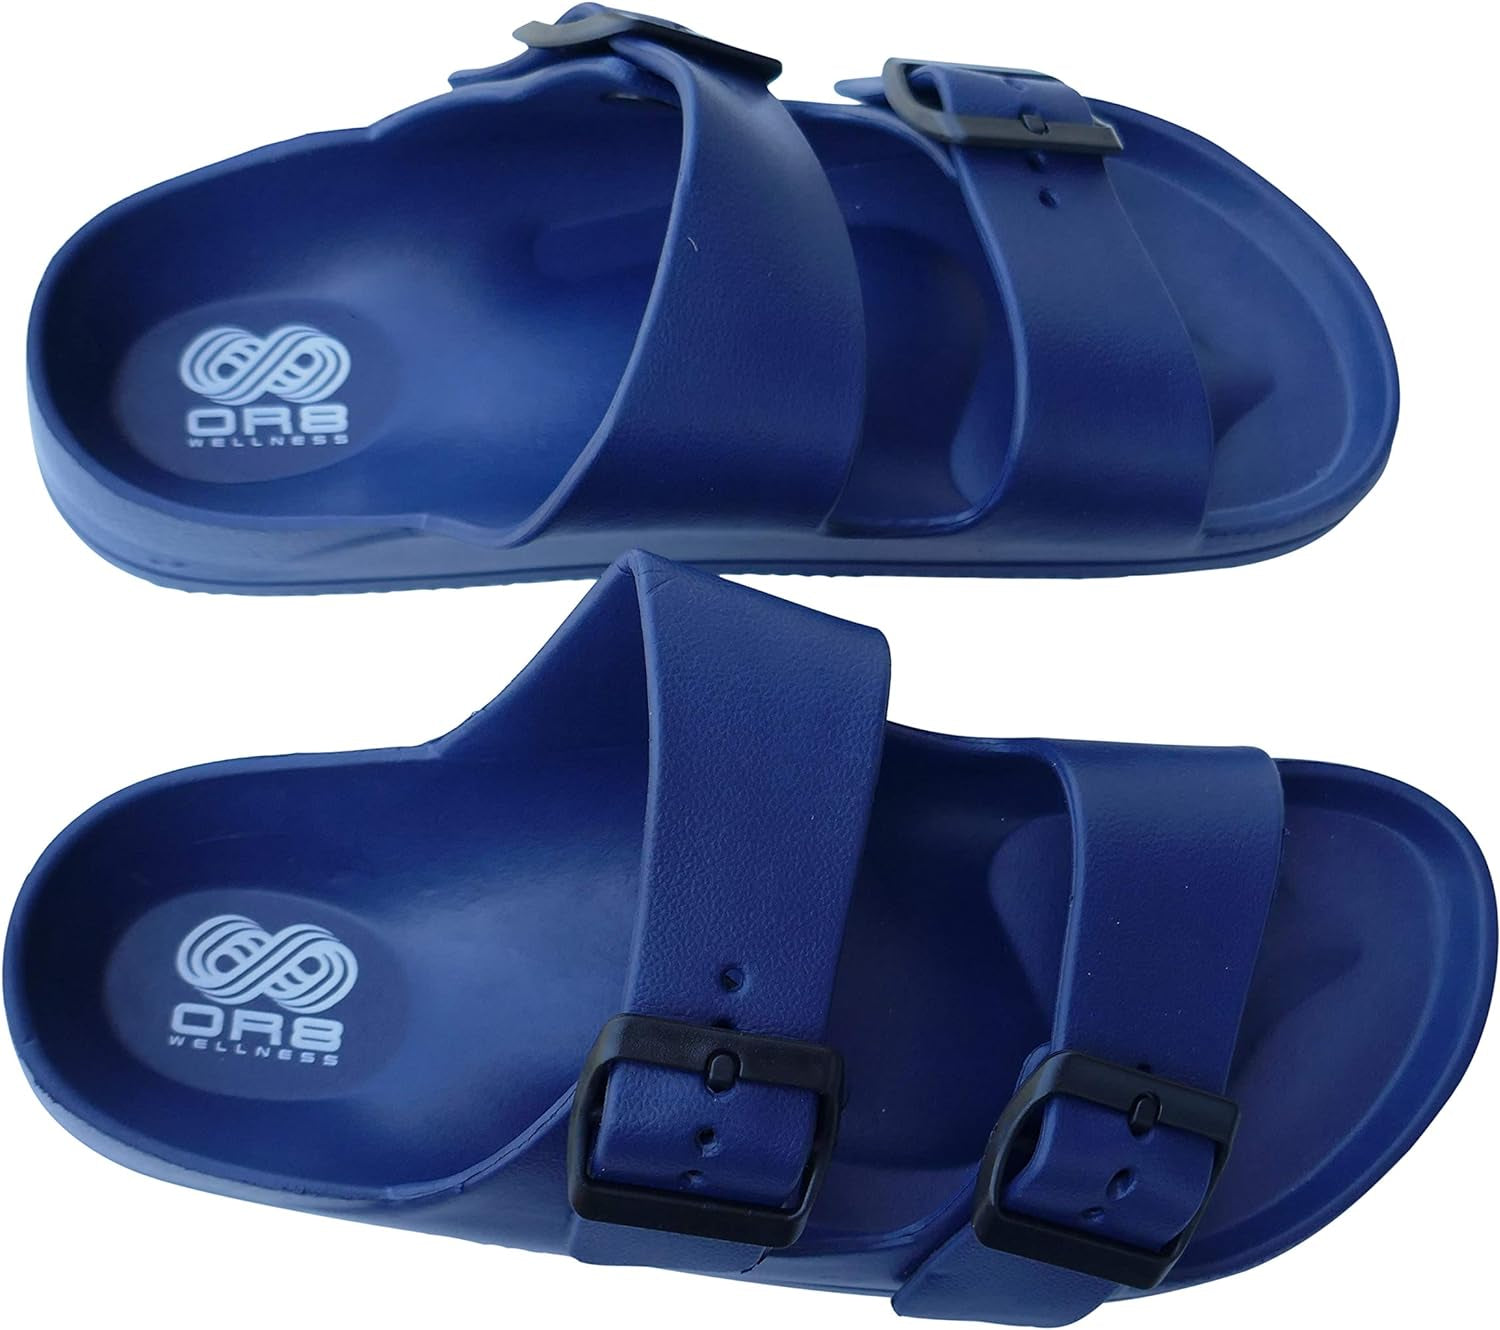 Plantar Fasciitis Orthotic Sandals with Arch Support, Heel Cup & Met Cushion. Stylish, Adjustable, Waterproof, Comfortable & Ultra-Lightweight